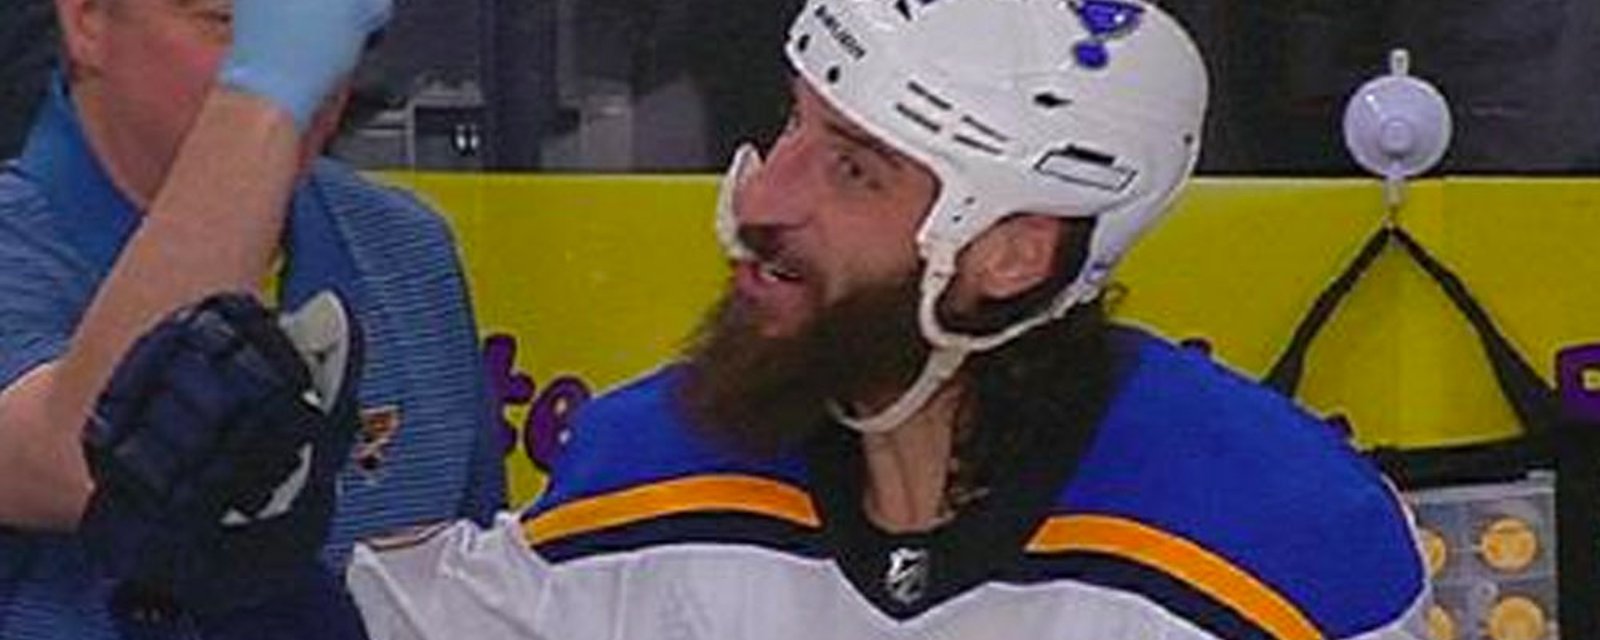 Stanley Cup champion Thorburn retires after emotional year with Blues 